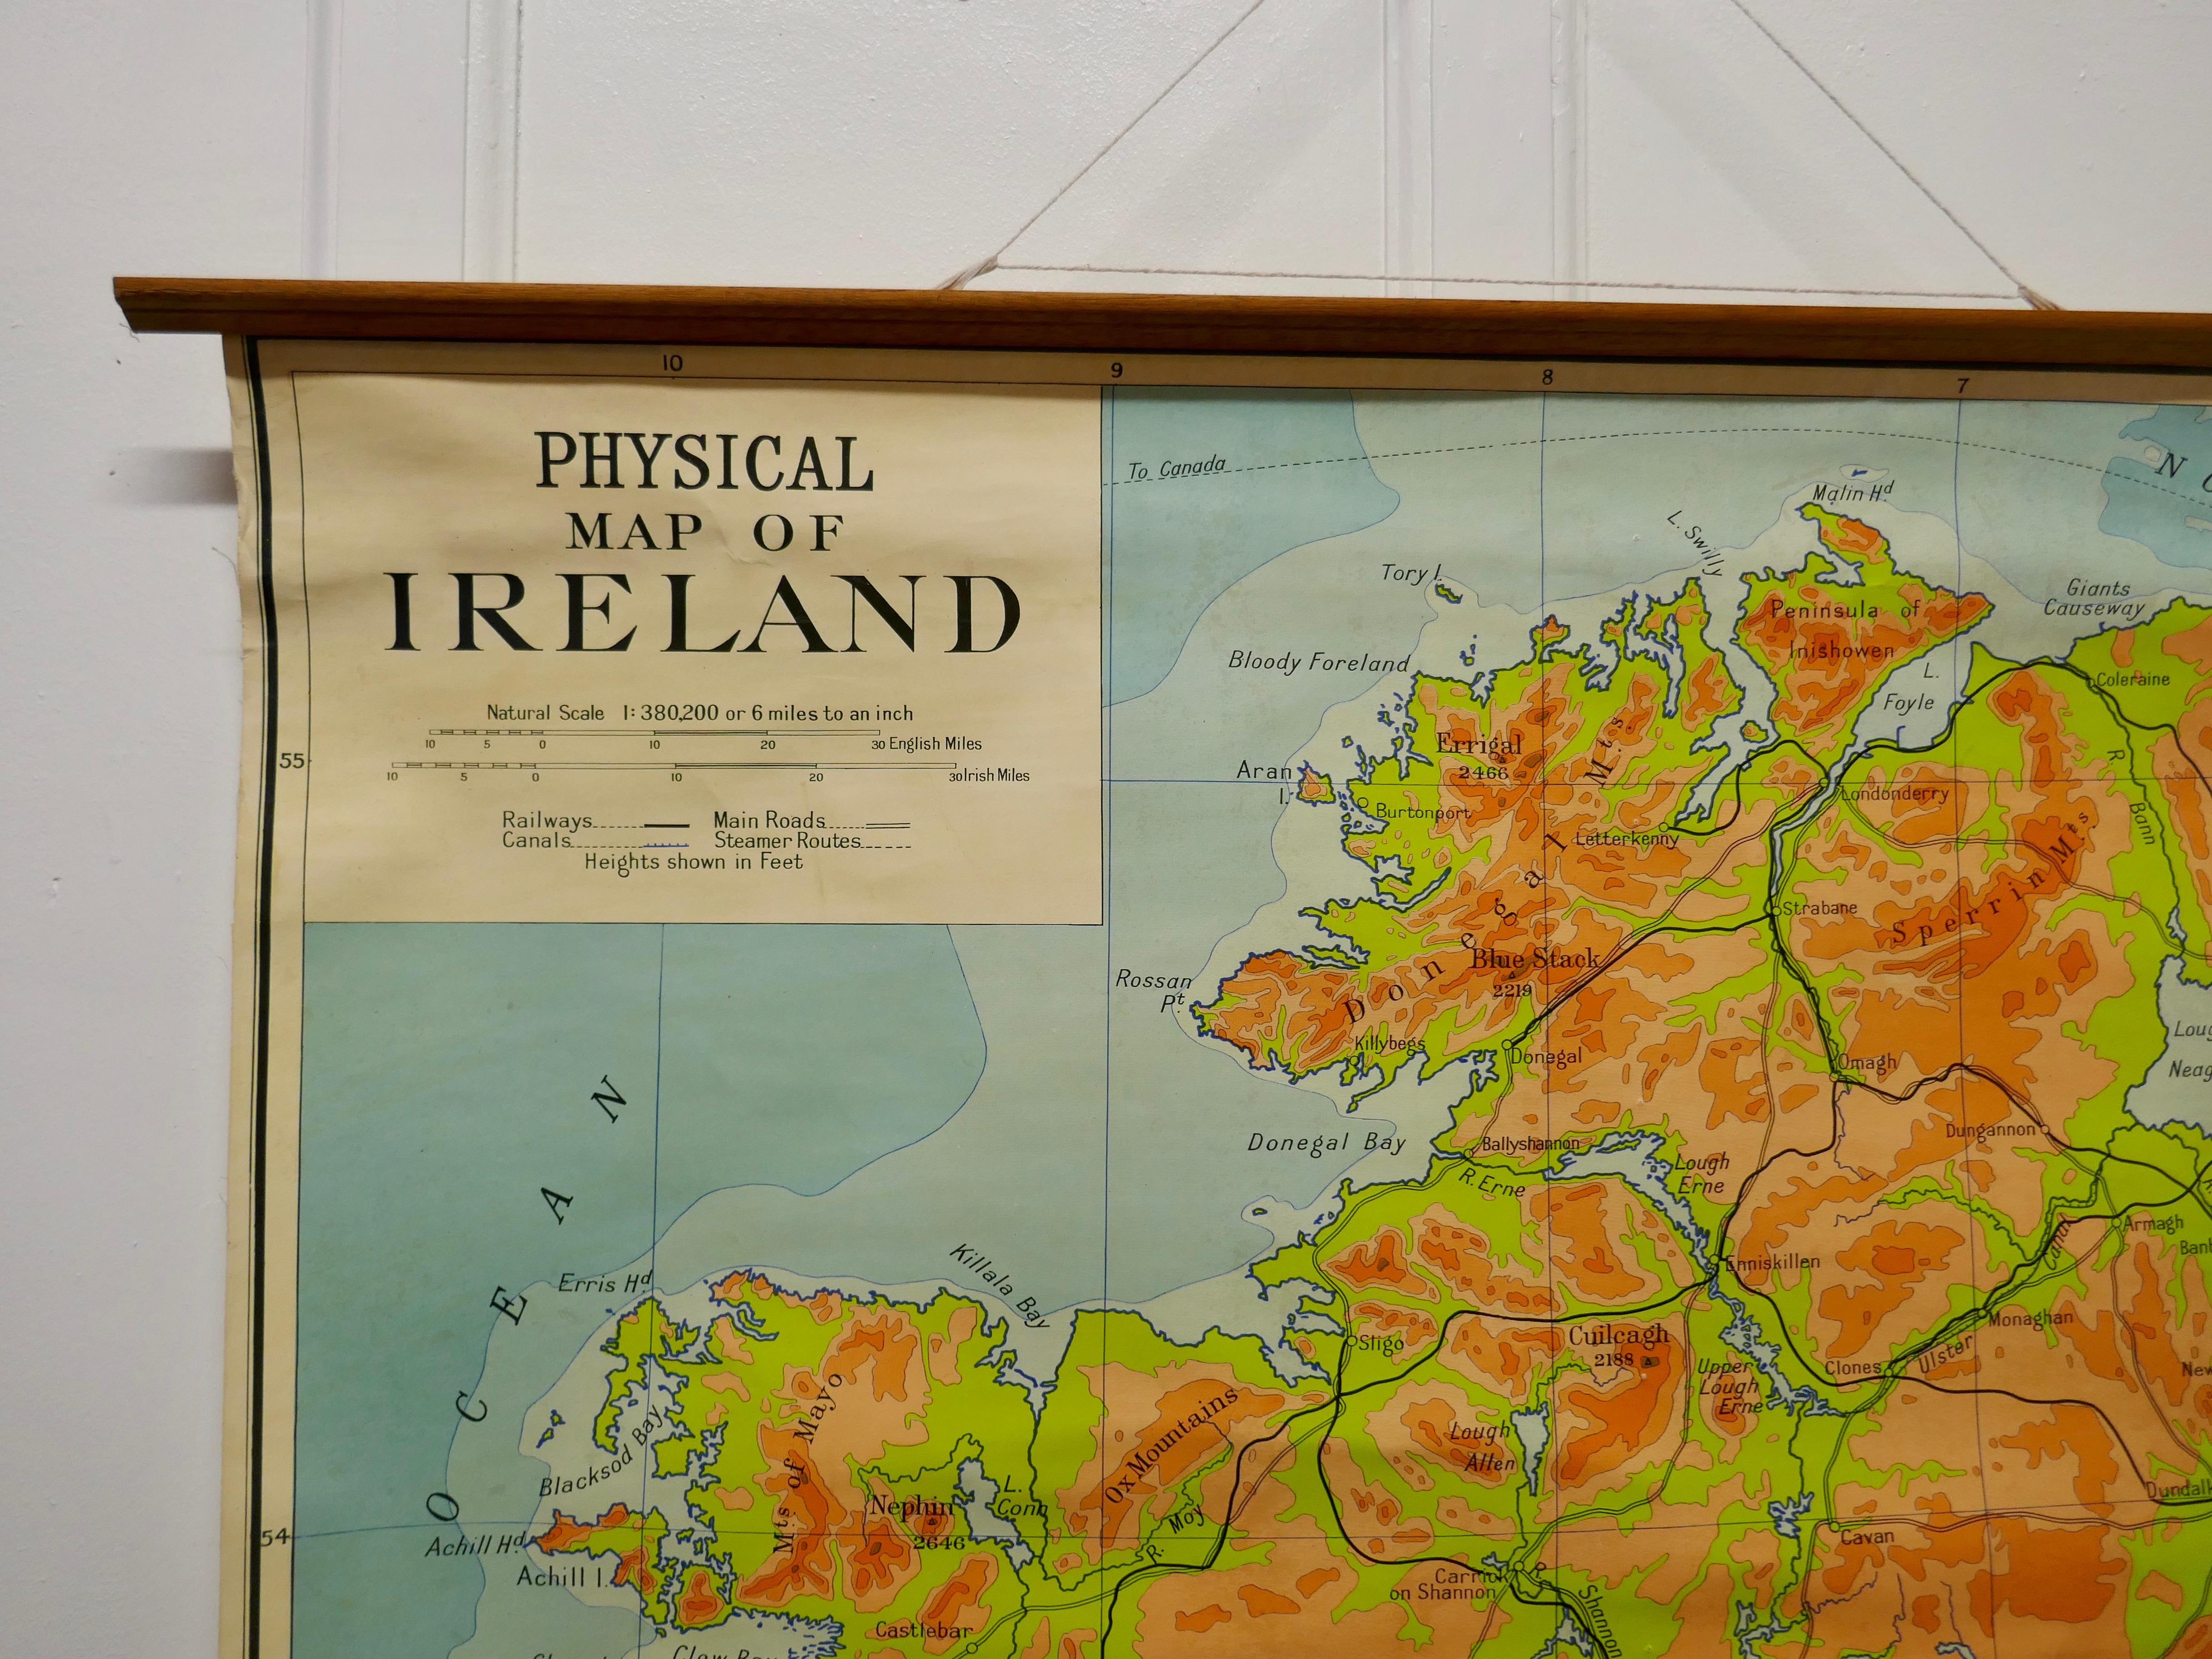 Large University Chart “Physical Map of Ireland” by Bacon

W&A K Johnston’s Charts of Physical Maps By G W Bacon,

This is colorful Physical map of Ireland, it is large lithograph set on Linen mounted on wooden rods, the chart is in very good